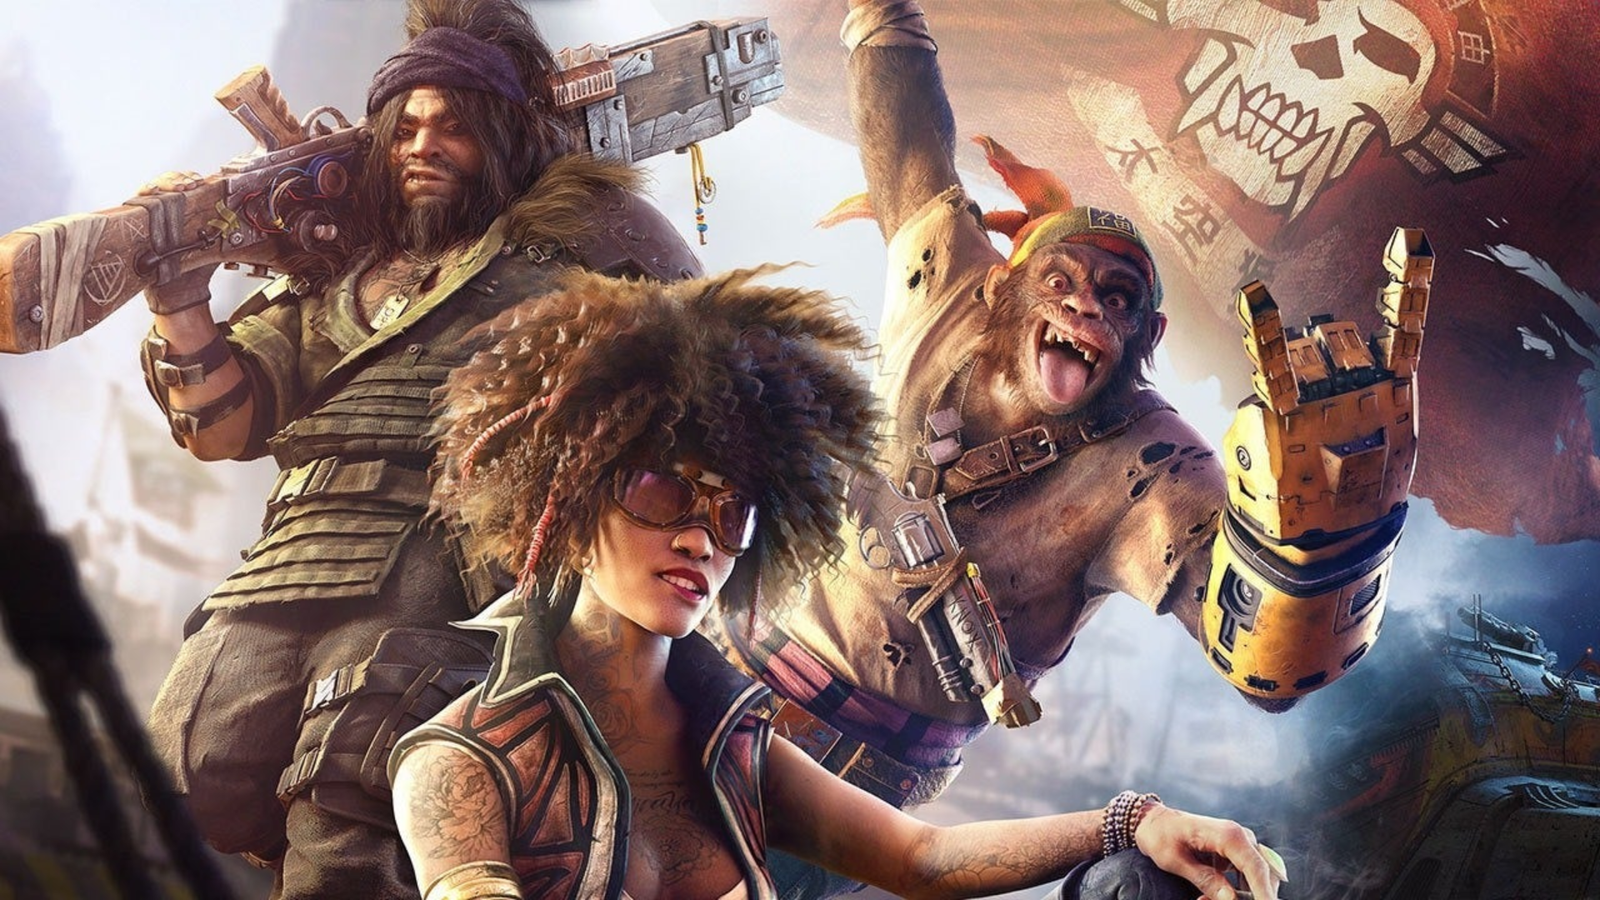 beyond good and evil 2 early development the main characters pose